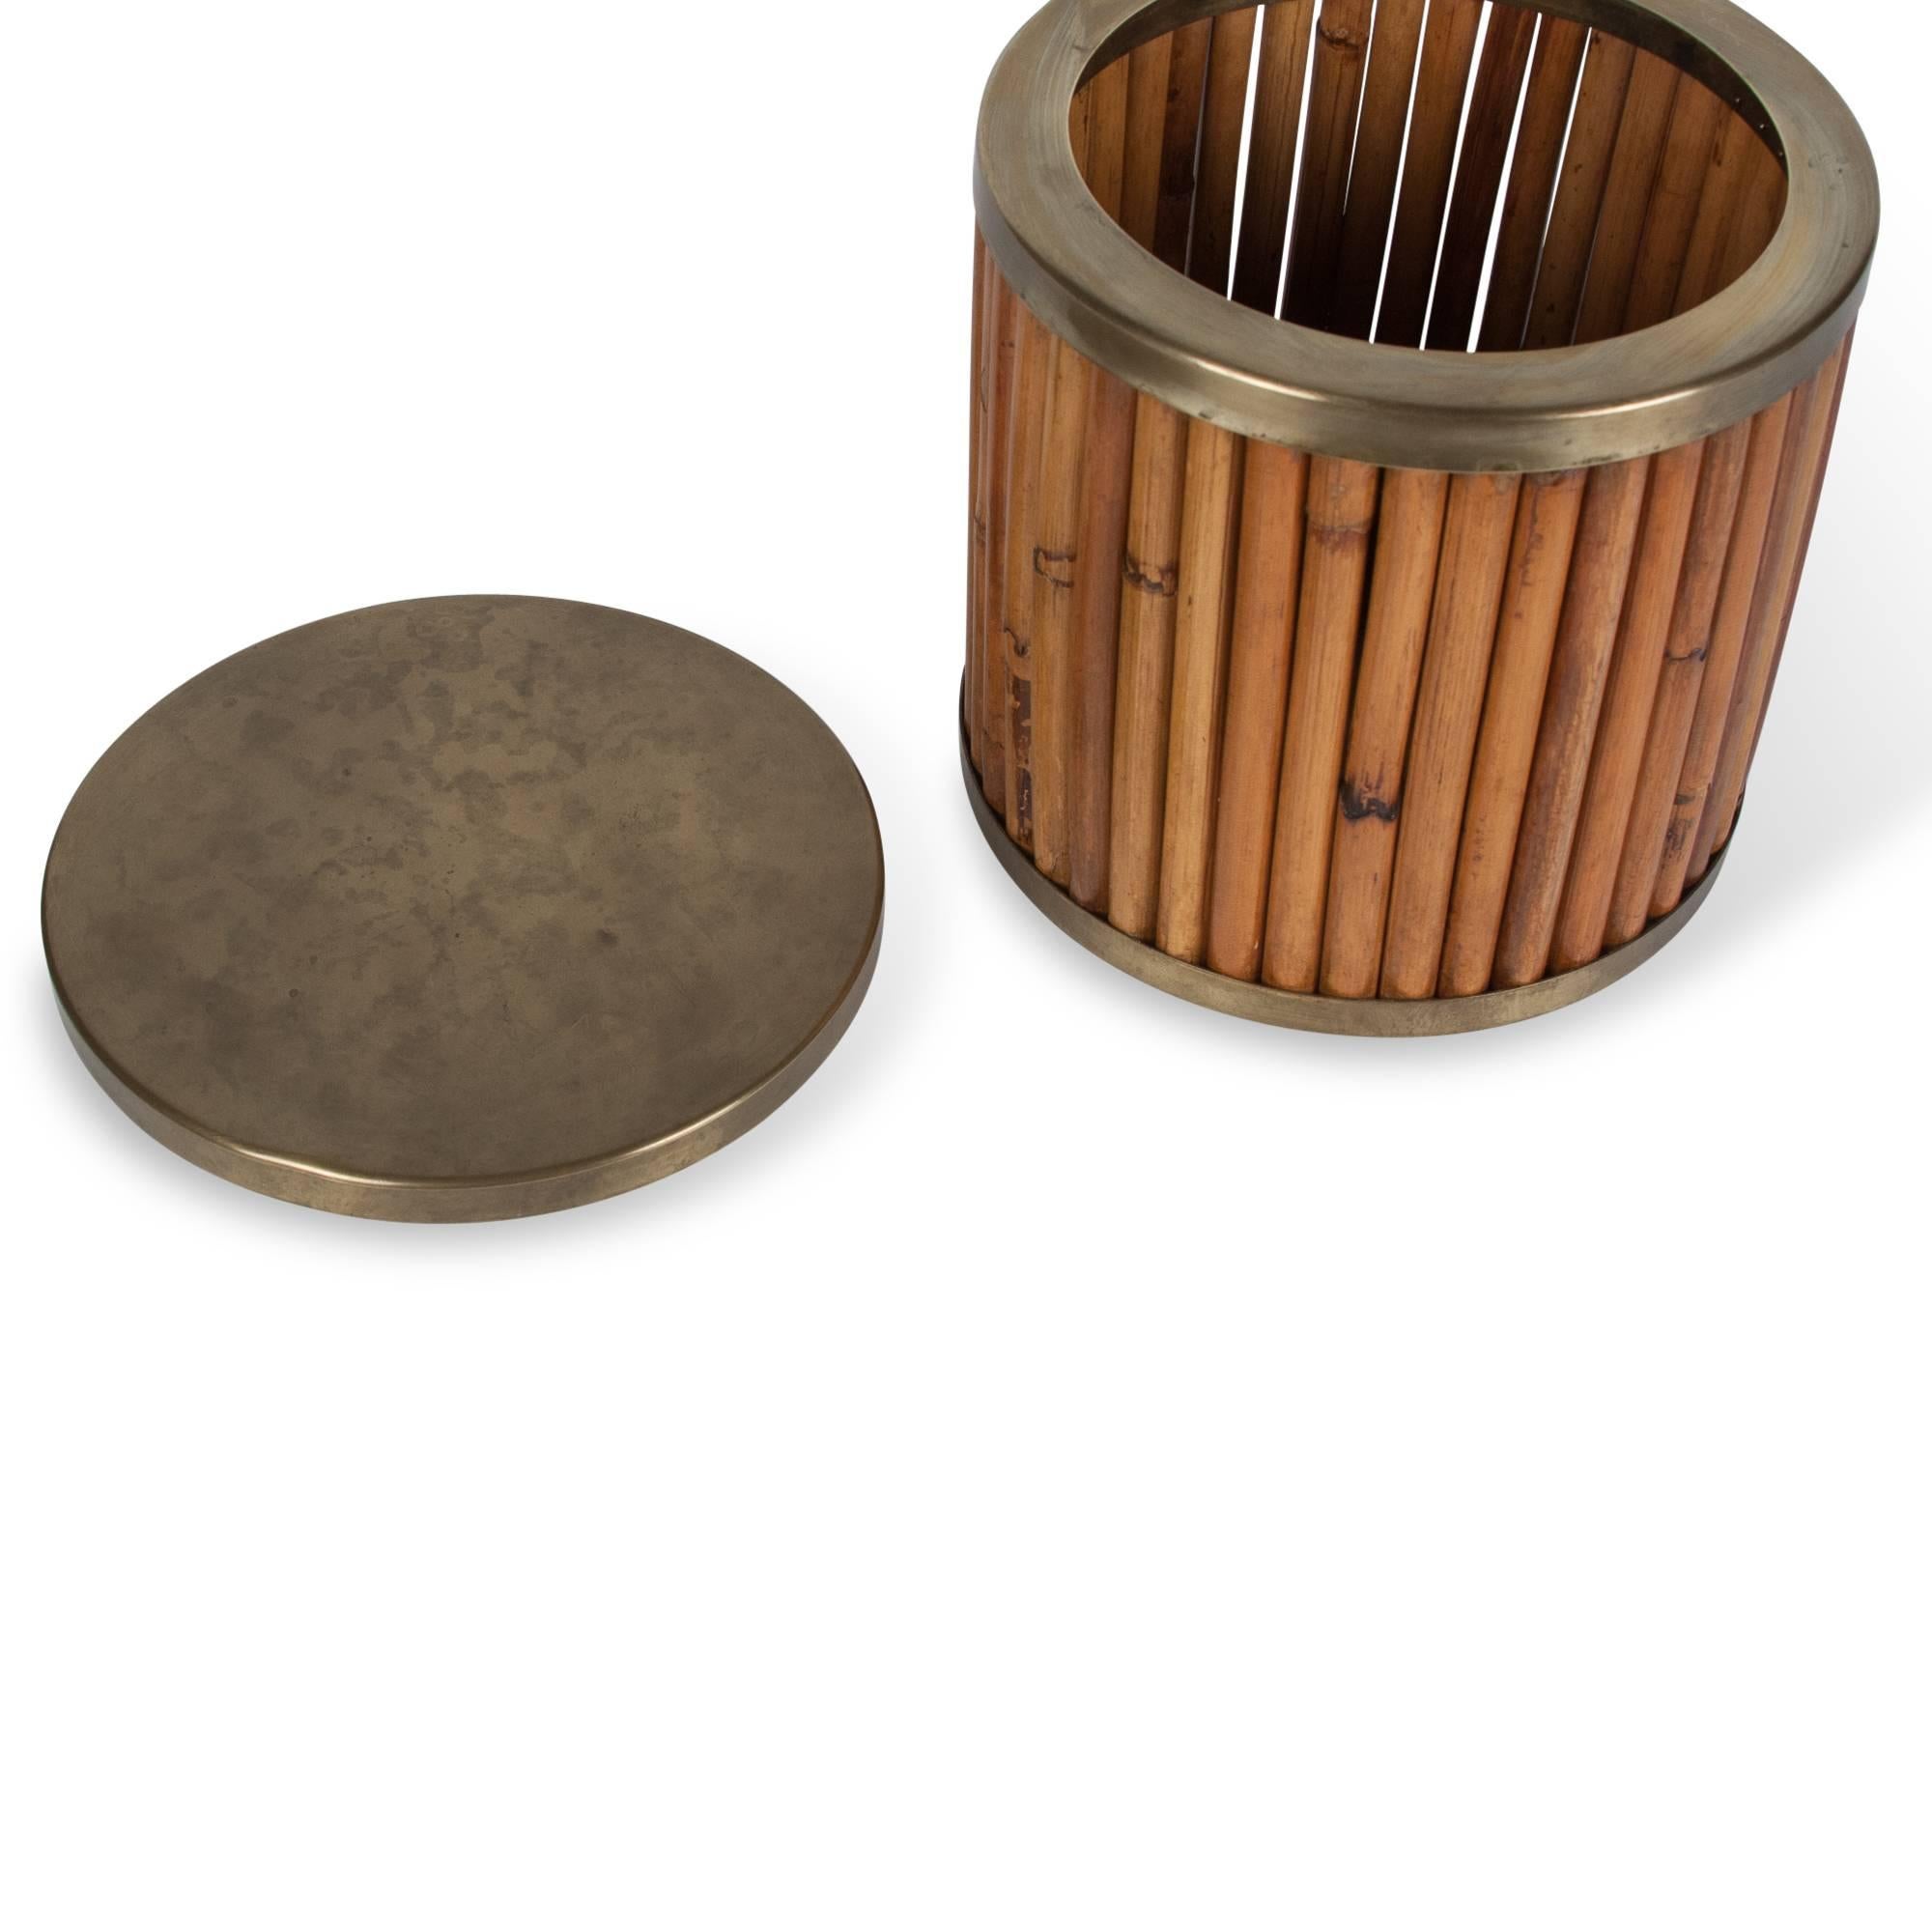 Italian Bamboo and Brass Wastebasket by Gabrielle Crespi For Sale